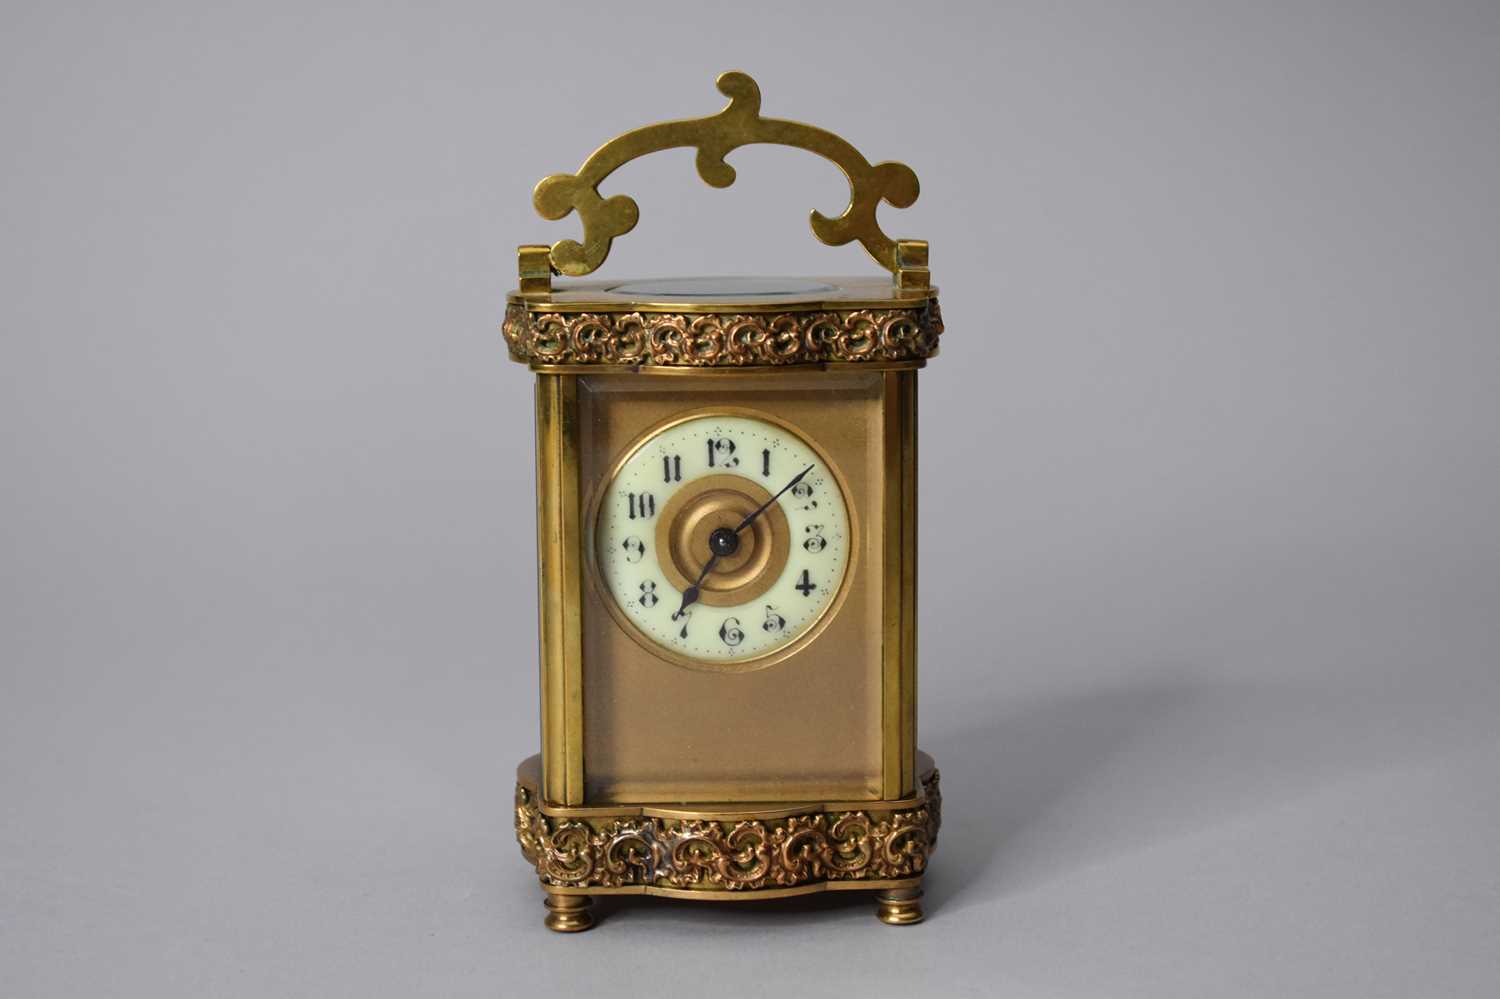 Lot 162 - An early 20th century French carriage timepiece, in a serpentine shaped case